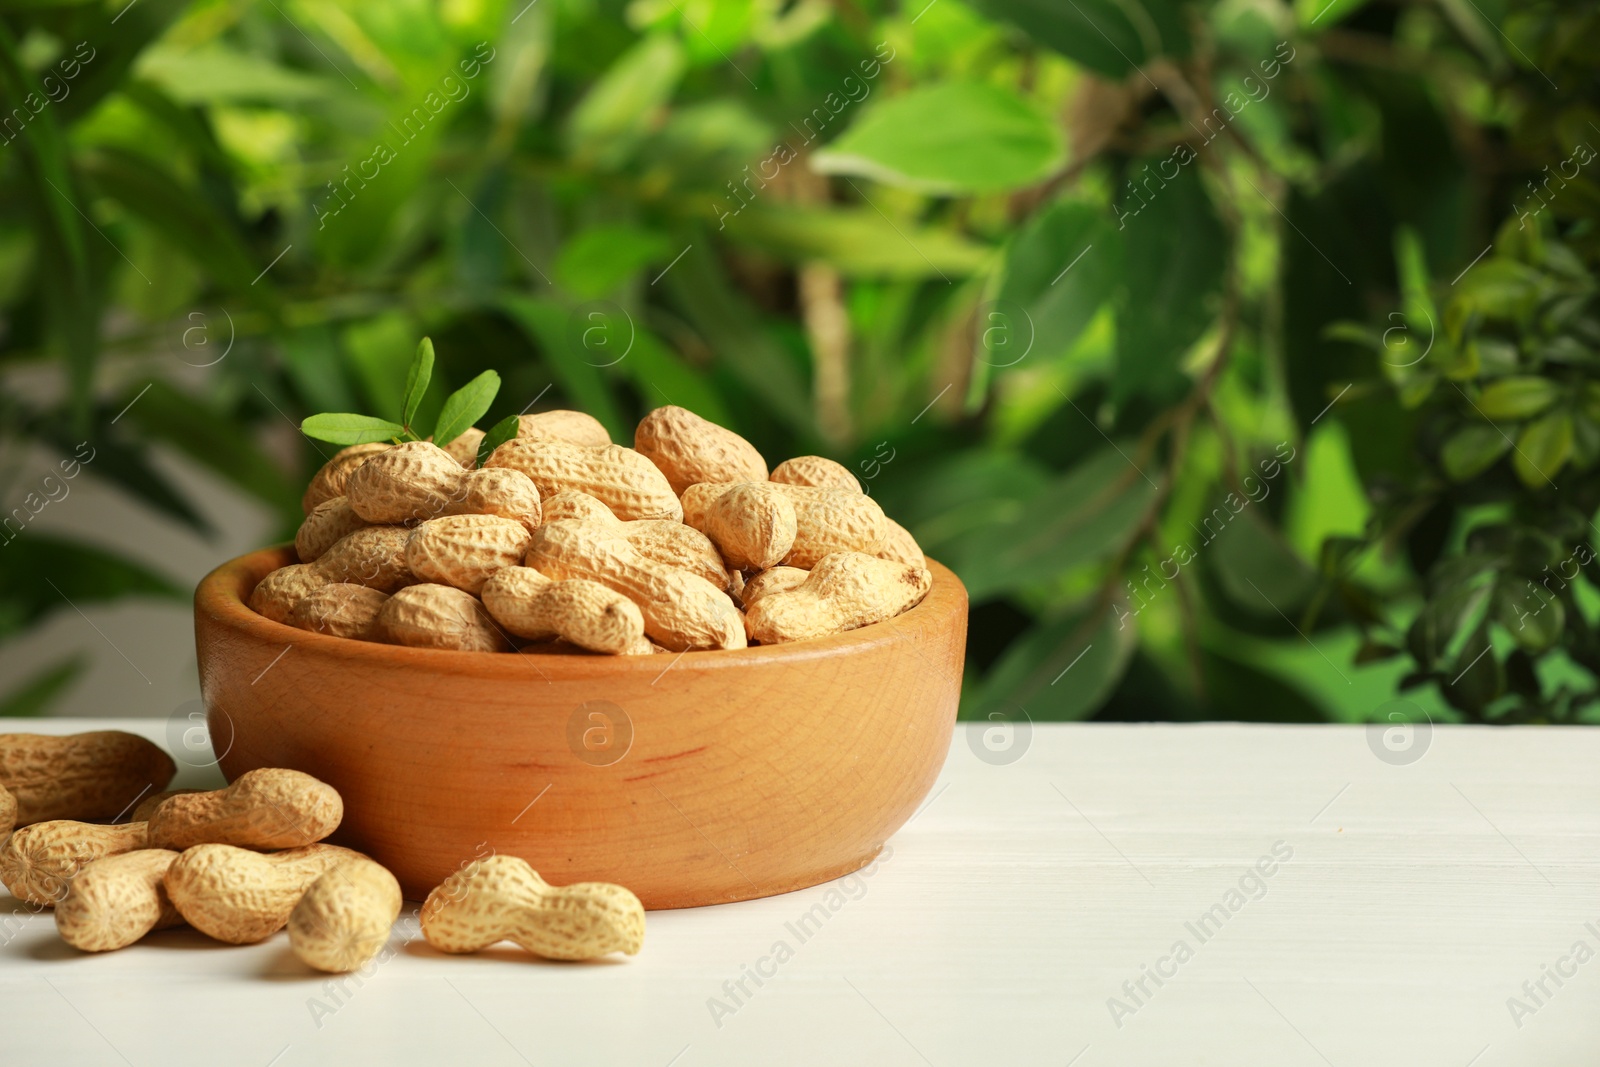 Photo of Fresh unpeeled peanuts in bowl on white table against blurred background, space for text